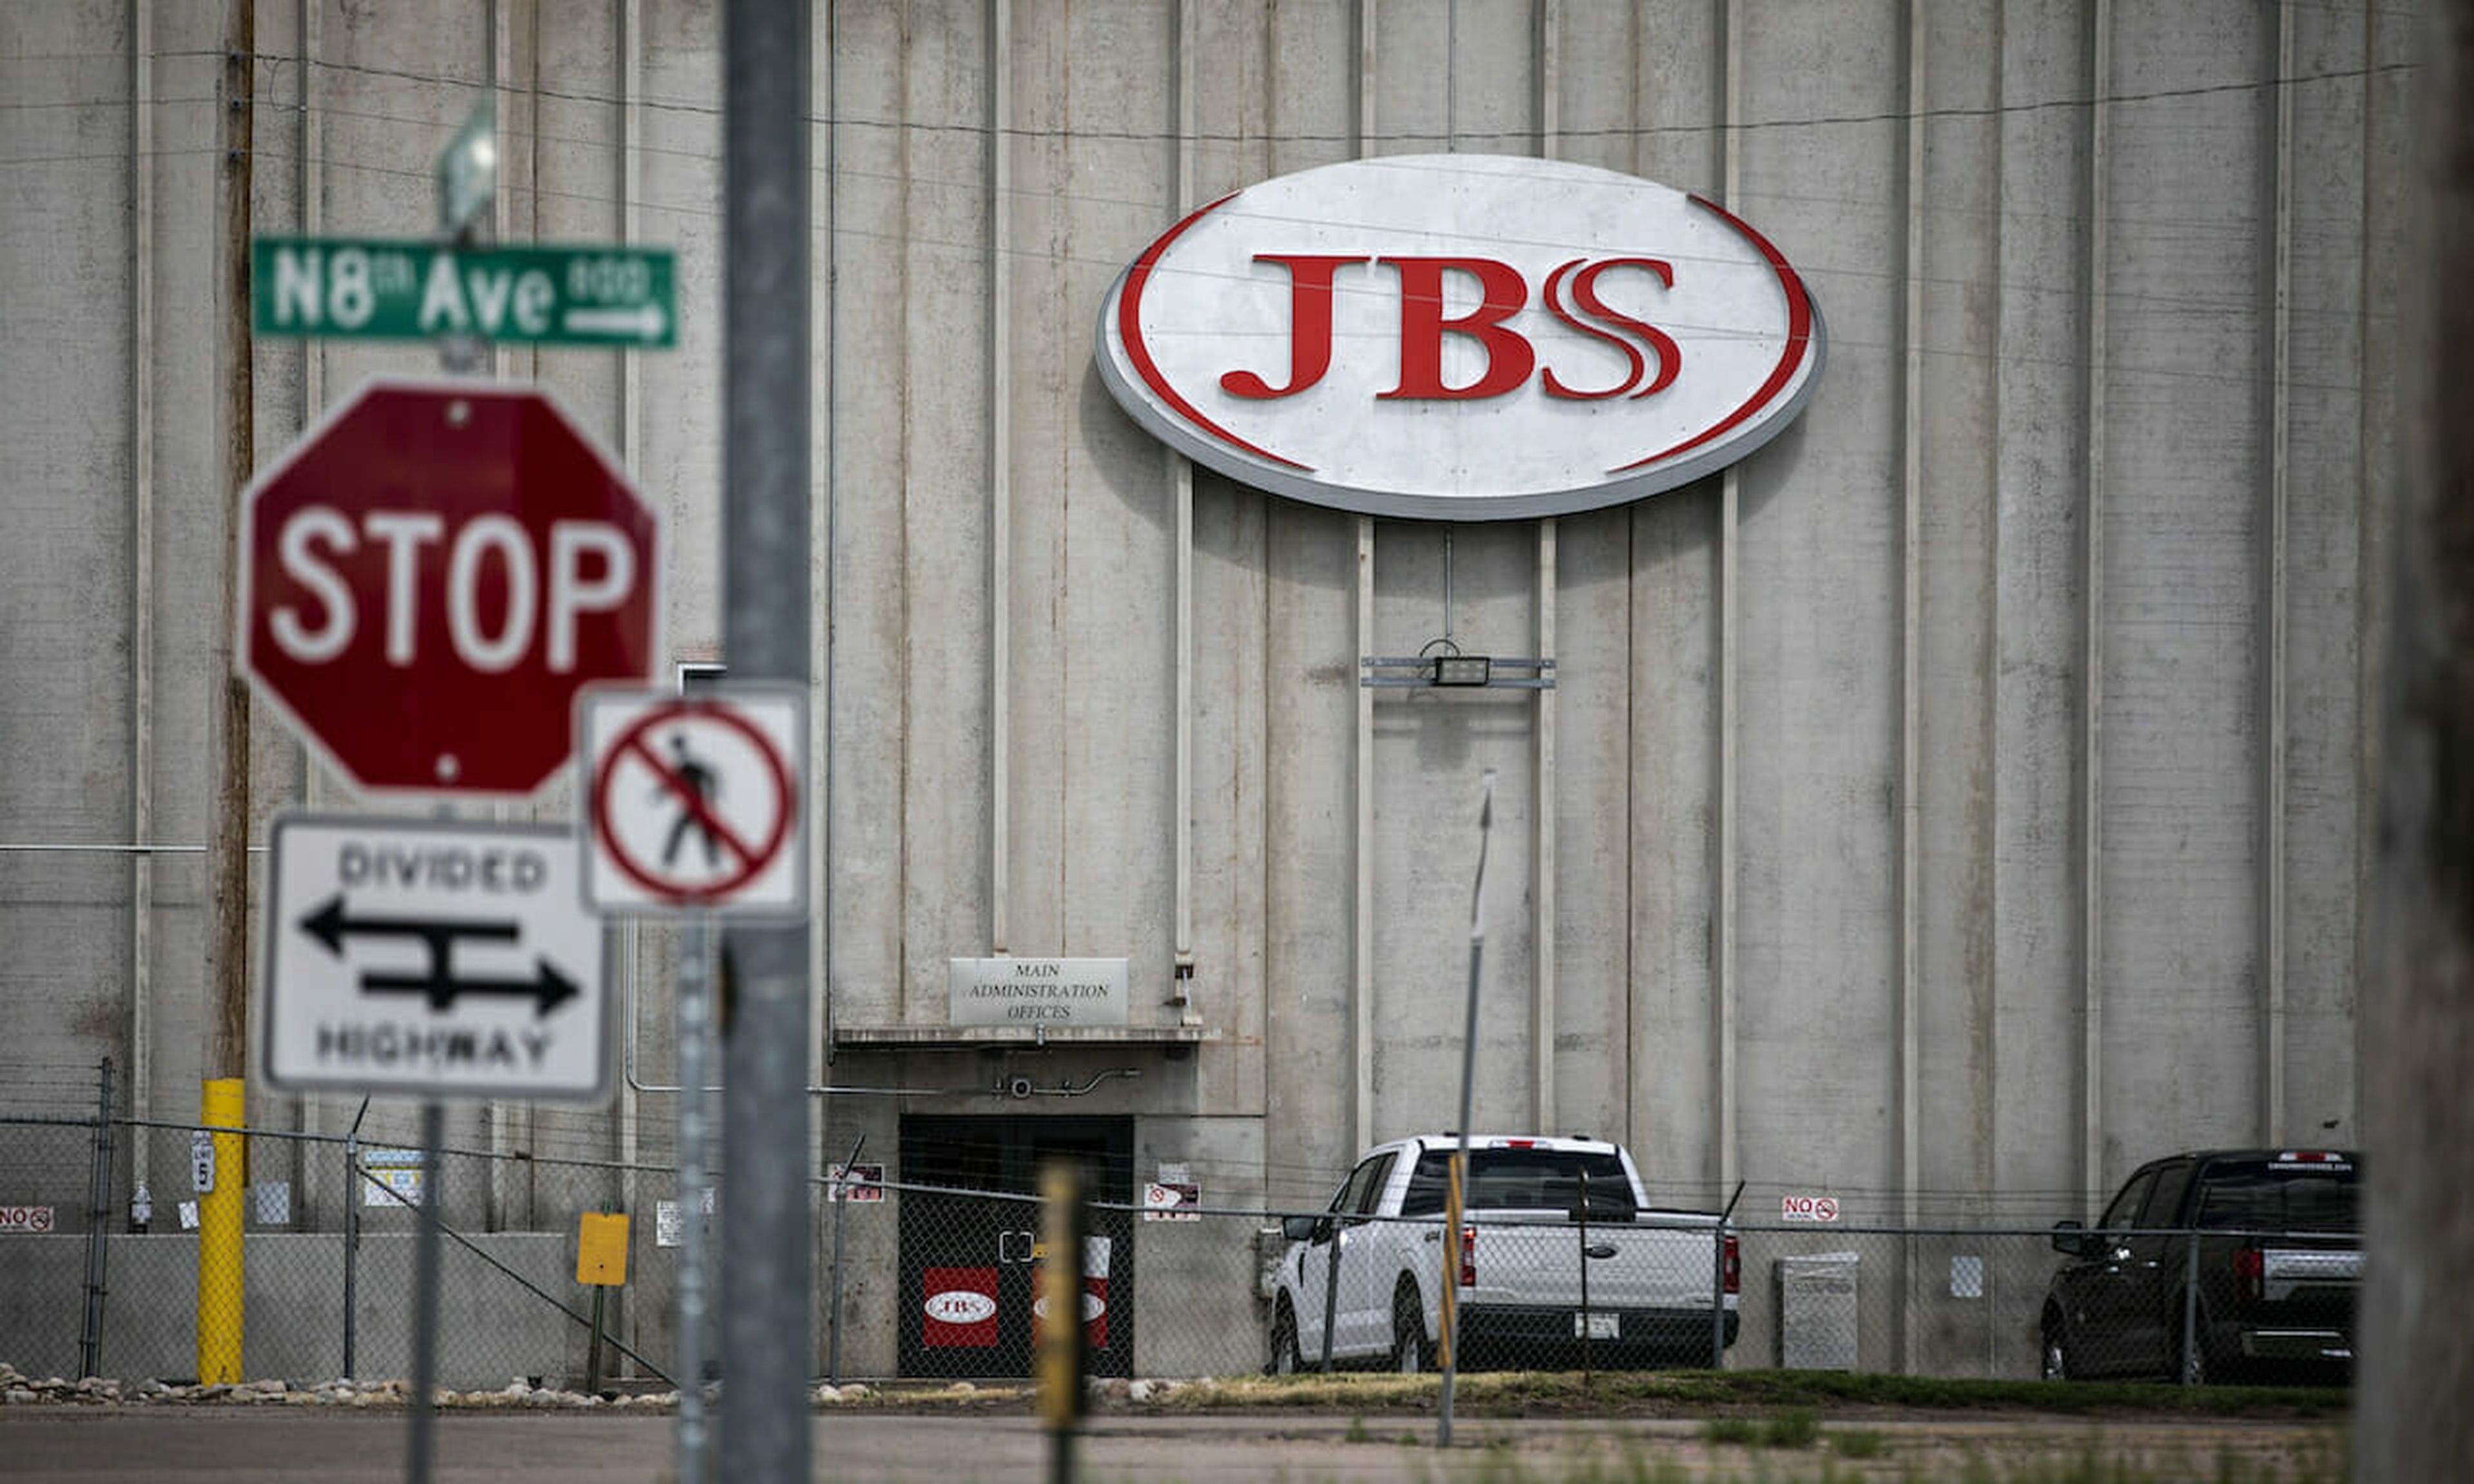 JBS food processing was among the companies targeted by ransomware gang REvil. Credit ratings agency Fitch Ratings said industries that rely too much on a single IT or security provider that gets hit with ransomware could see their credit posture harmed if it leads to significant service disruption. (Chet Strange/Getty Images)